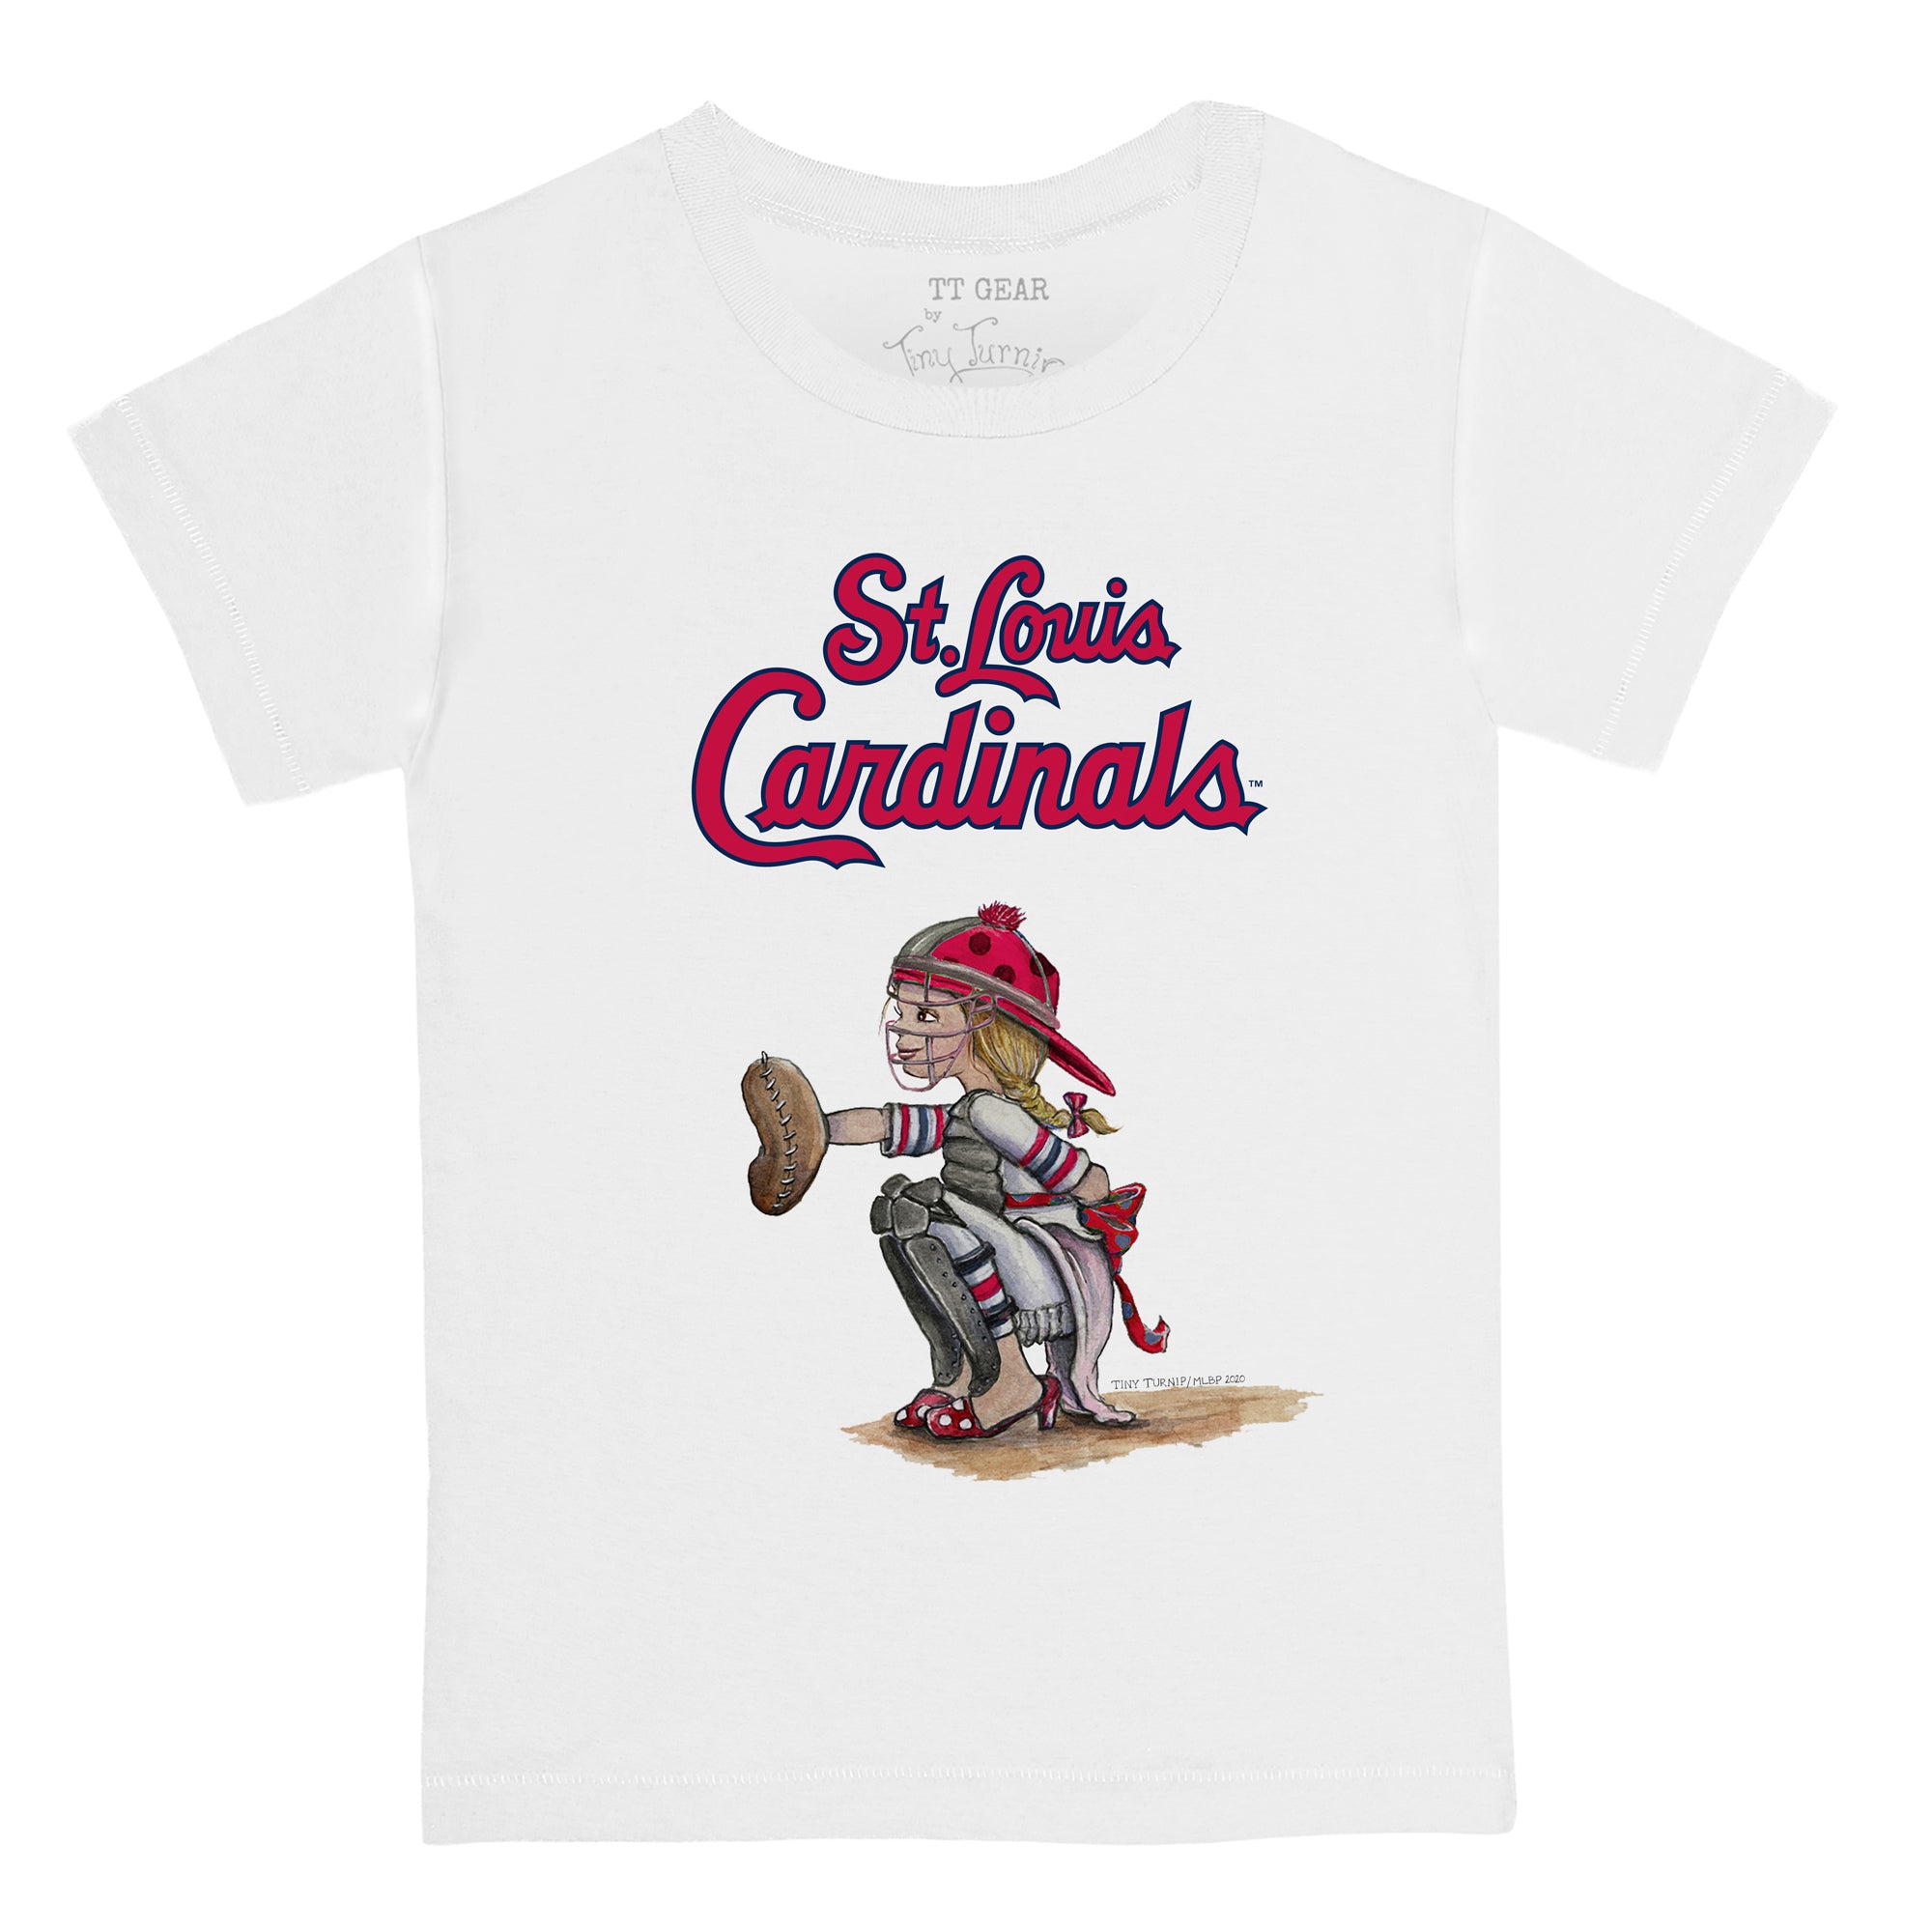 Unisex Tiny Turnip White/Red St. Louis Cardinals State Outline 3/4-Sleeve Raglan T-Shirt Size: Large